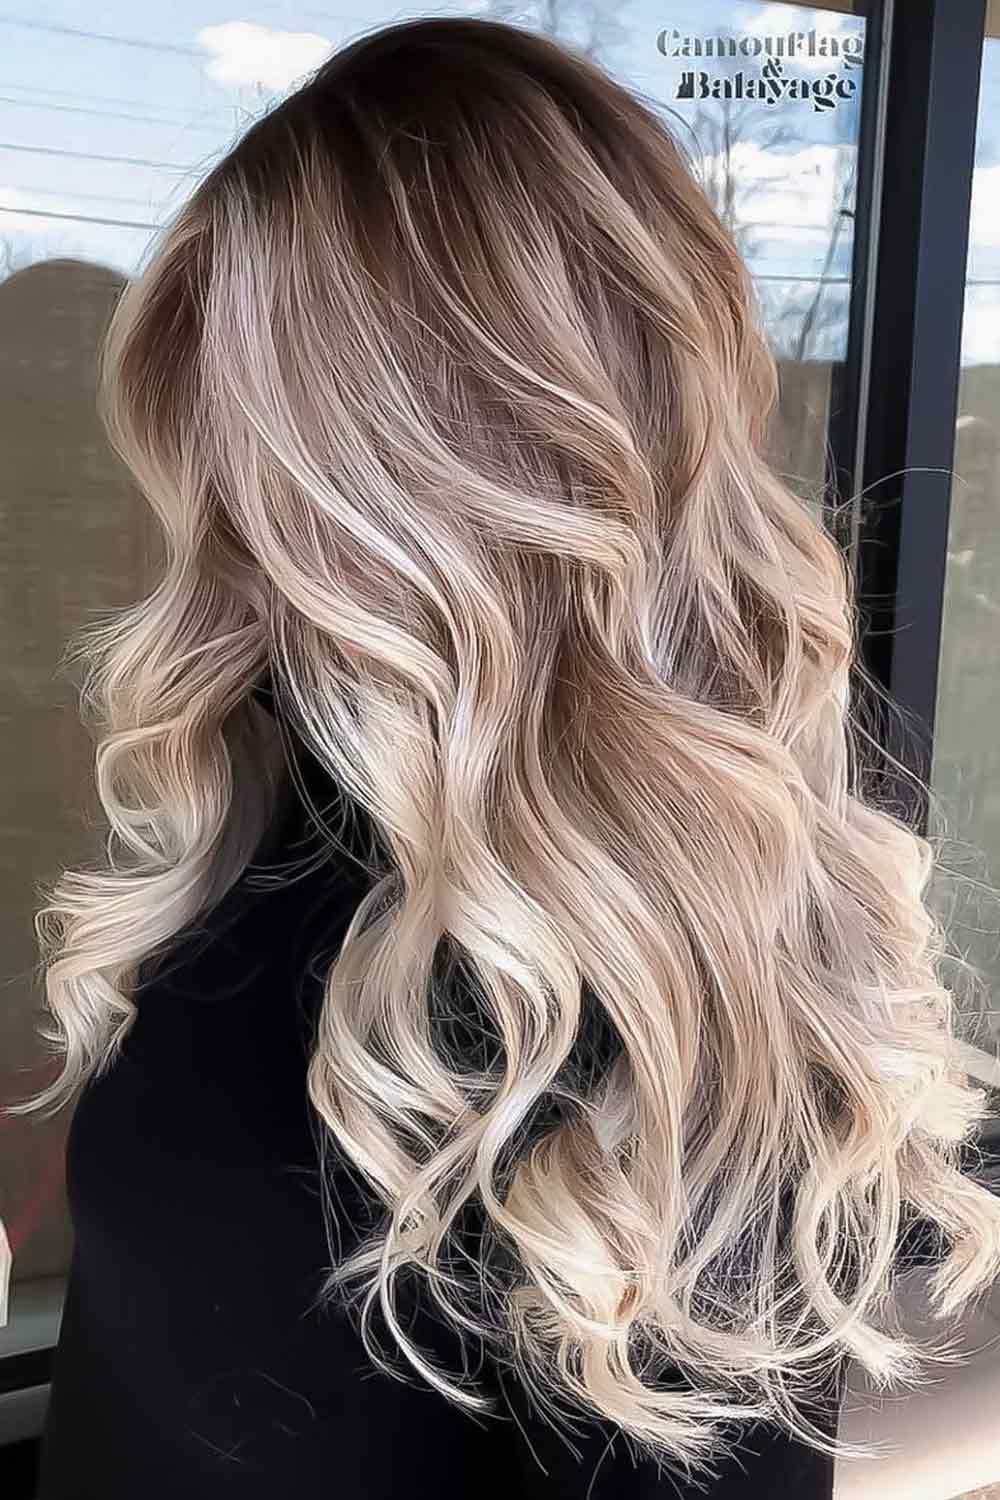 Long Wavy Hair with Highlights